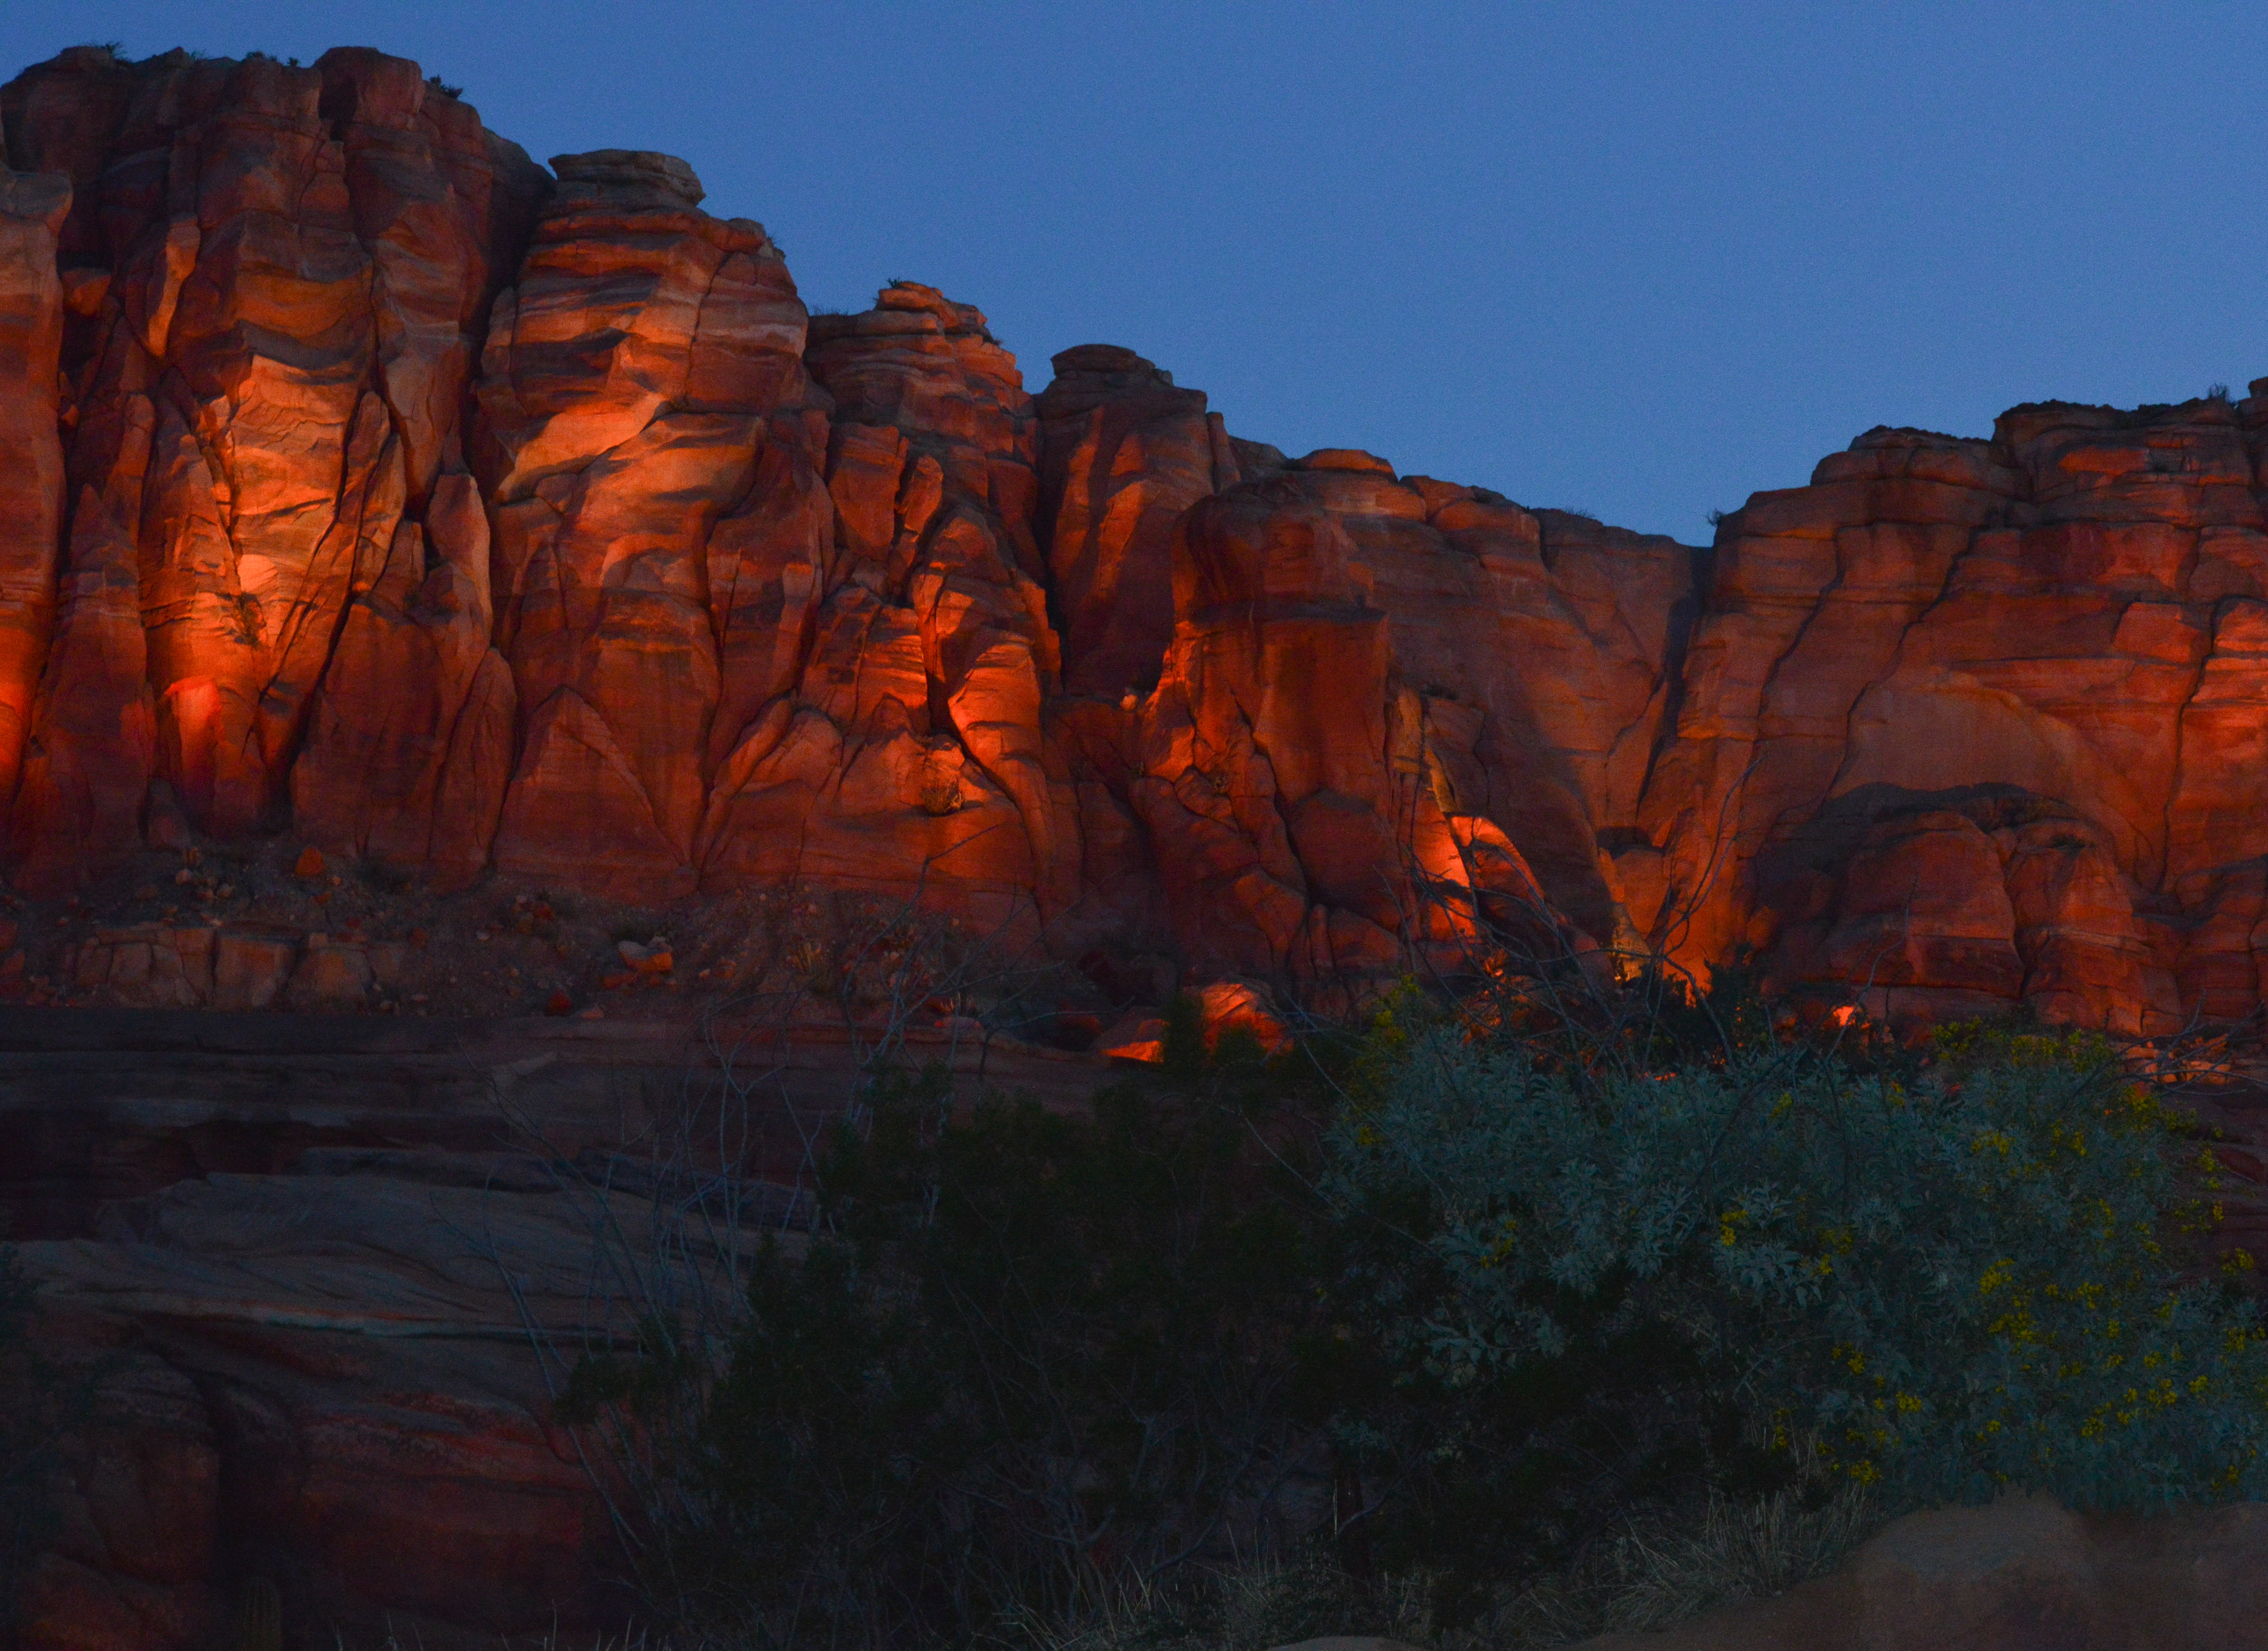  Disneyland Cars Land tips featured by top Denver travel blog, All Things Lovely